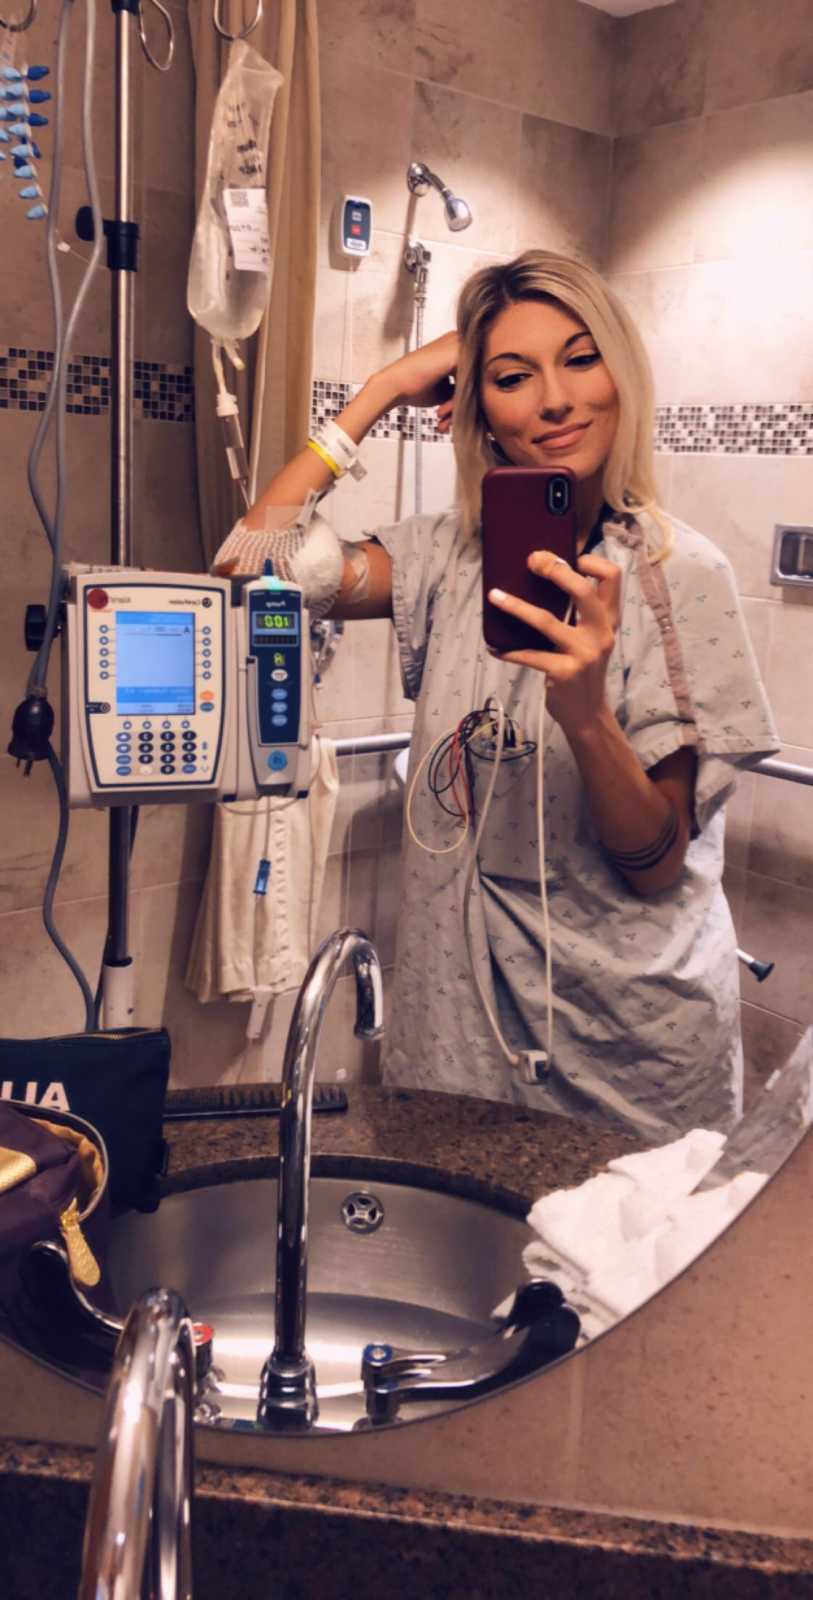 Woman with Superior Mesenteric Artery Syndrome standing smiling in selfie in hospital bathroom